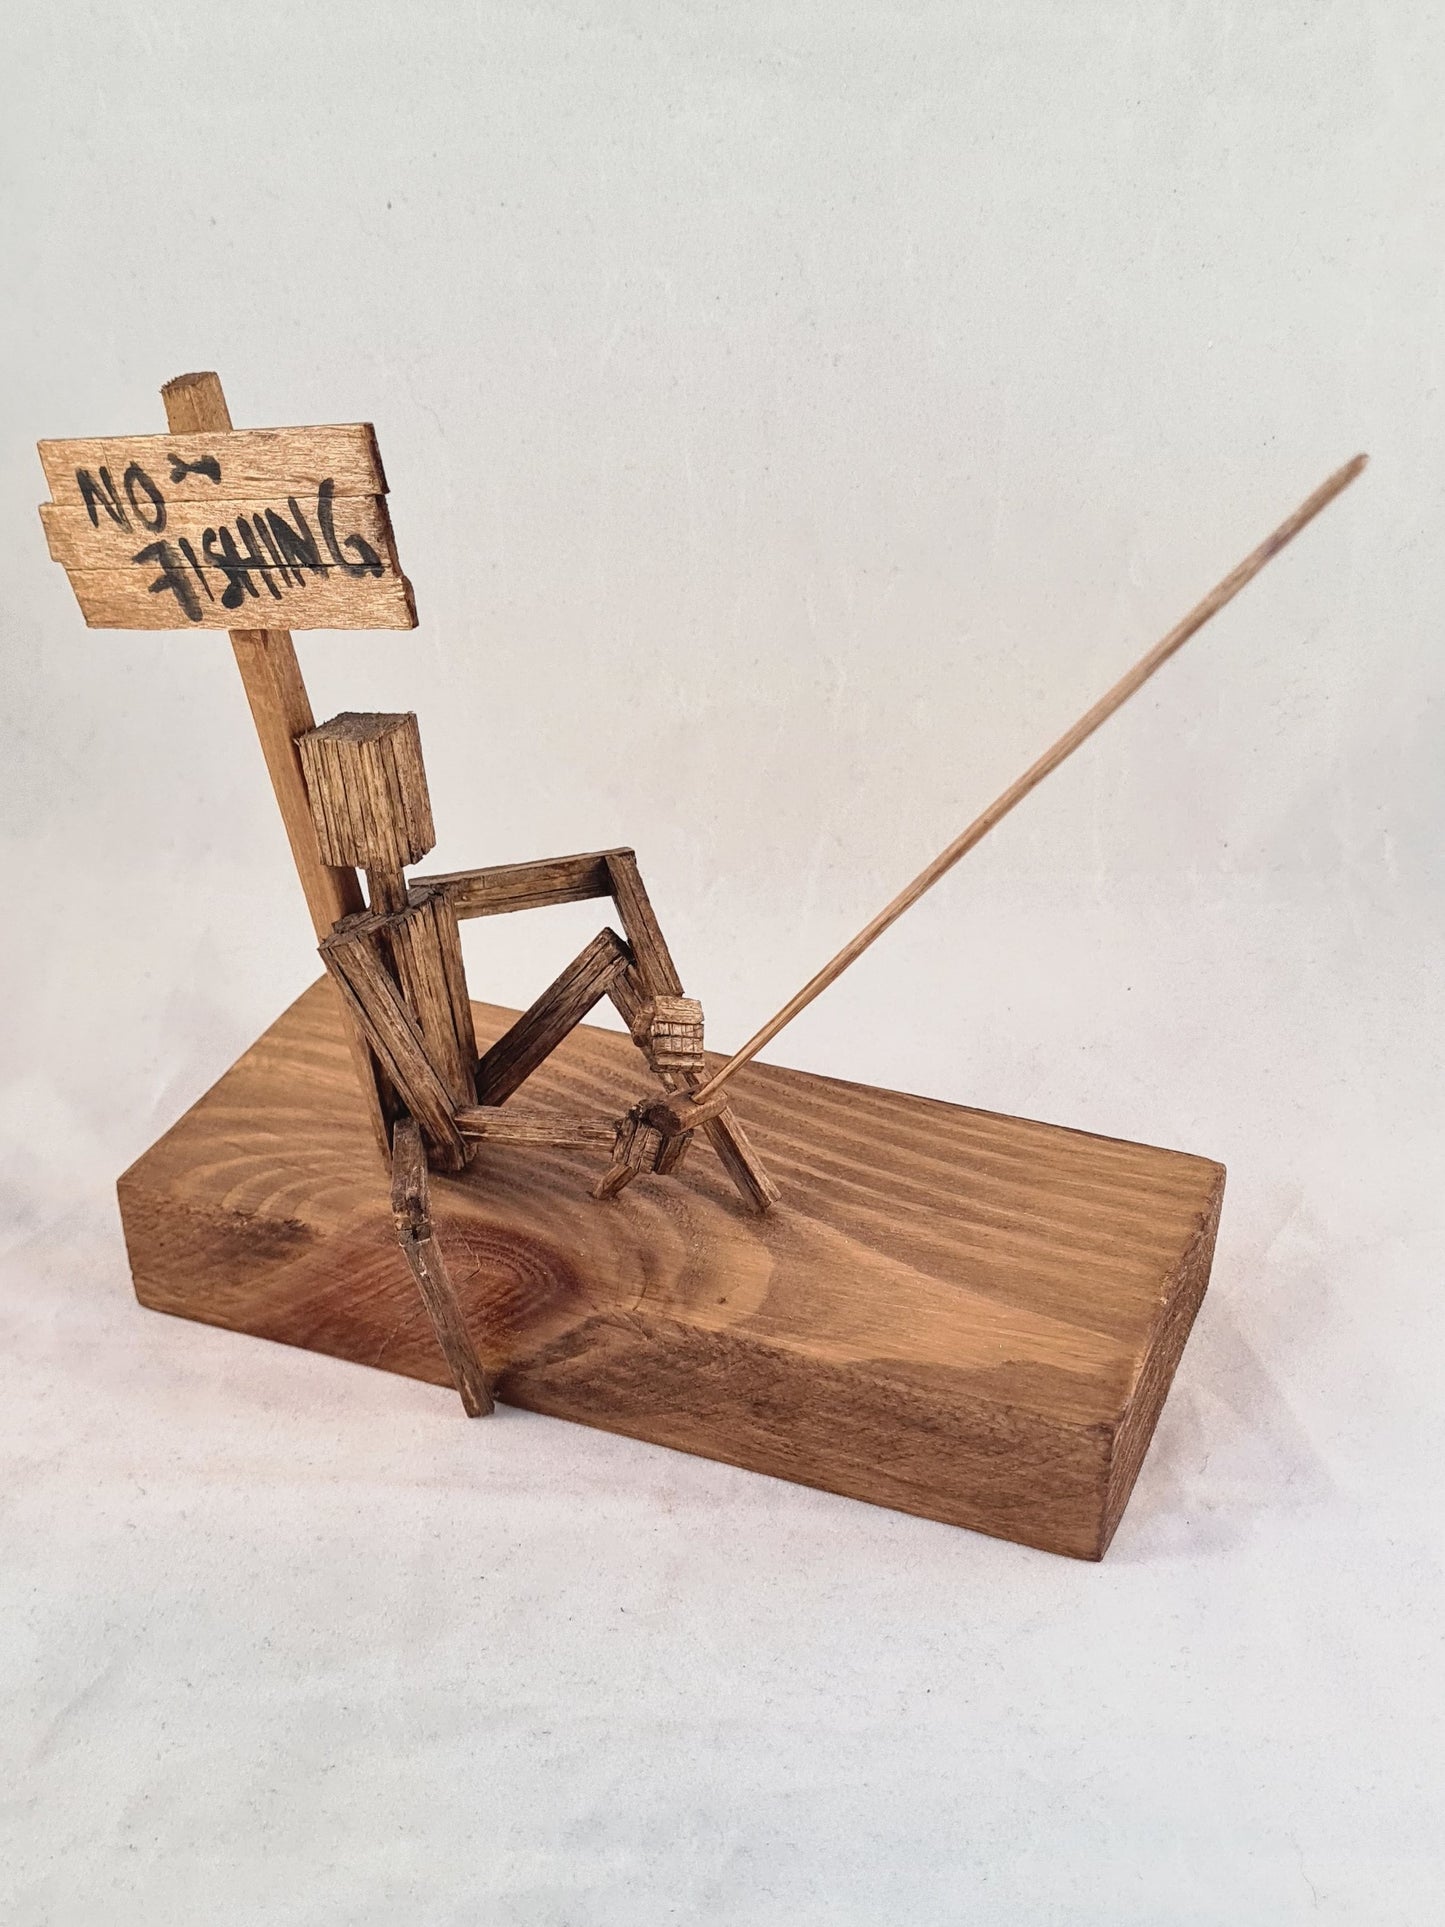 No Fishing - Handcrafted Wooden Matchstick Figures - Gifts, Ornaments and Decor By Tiggidy Designs